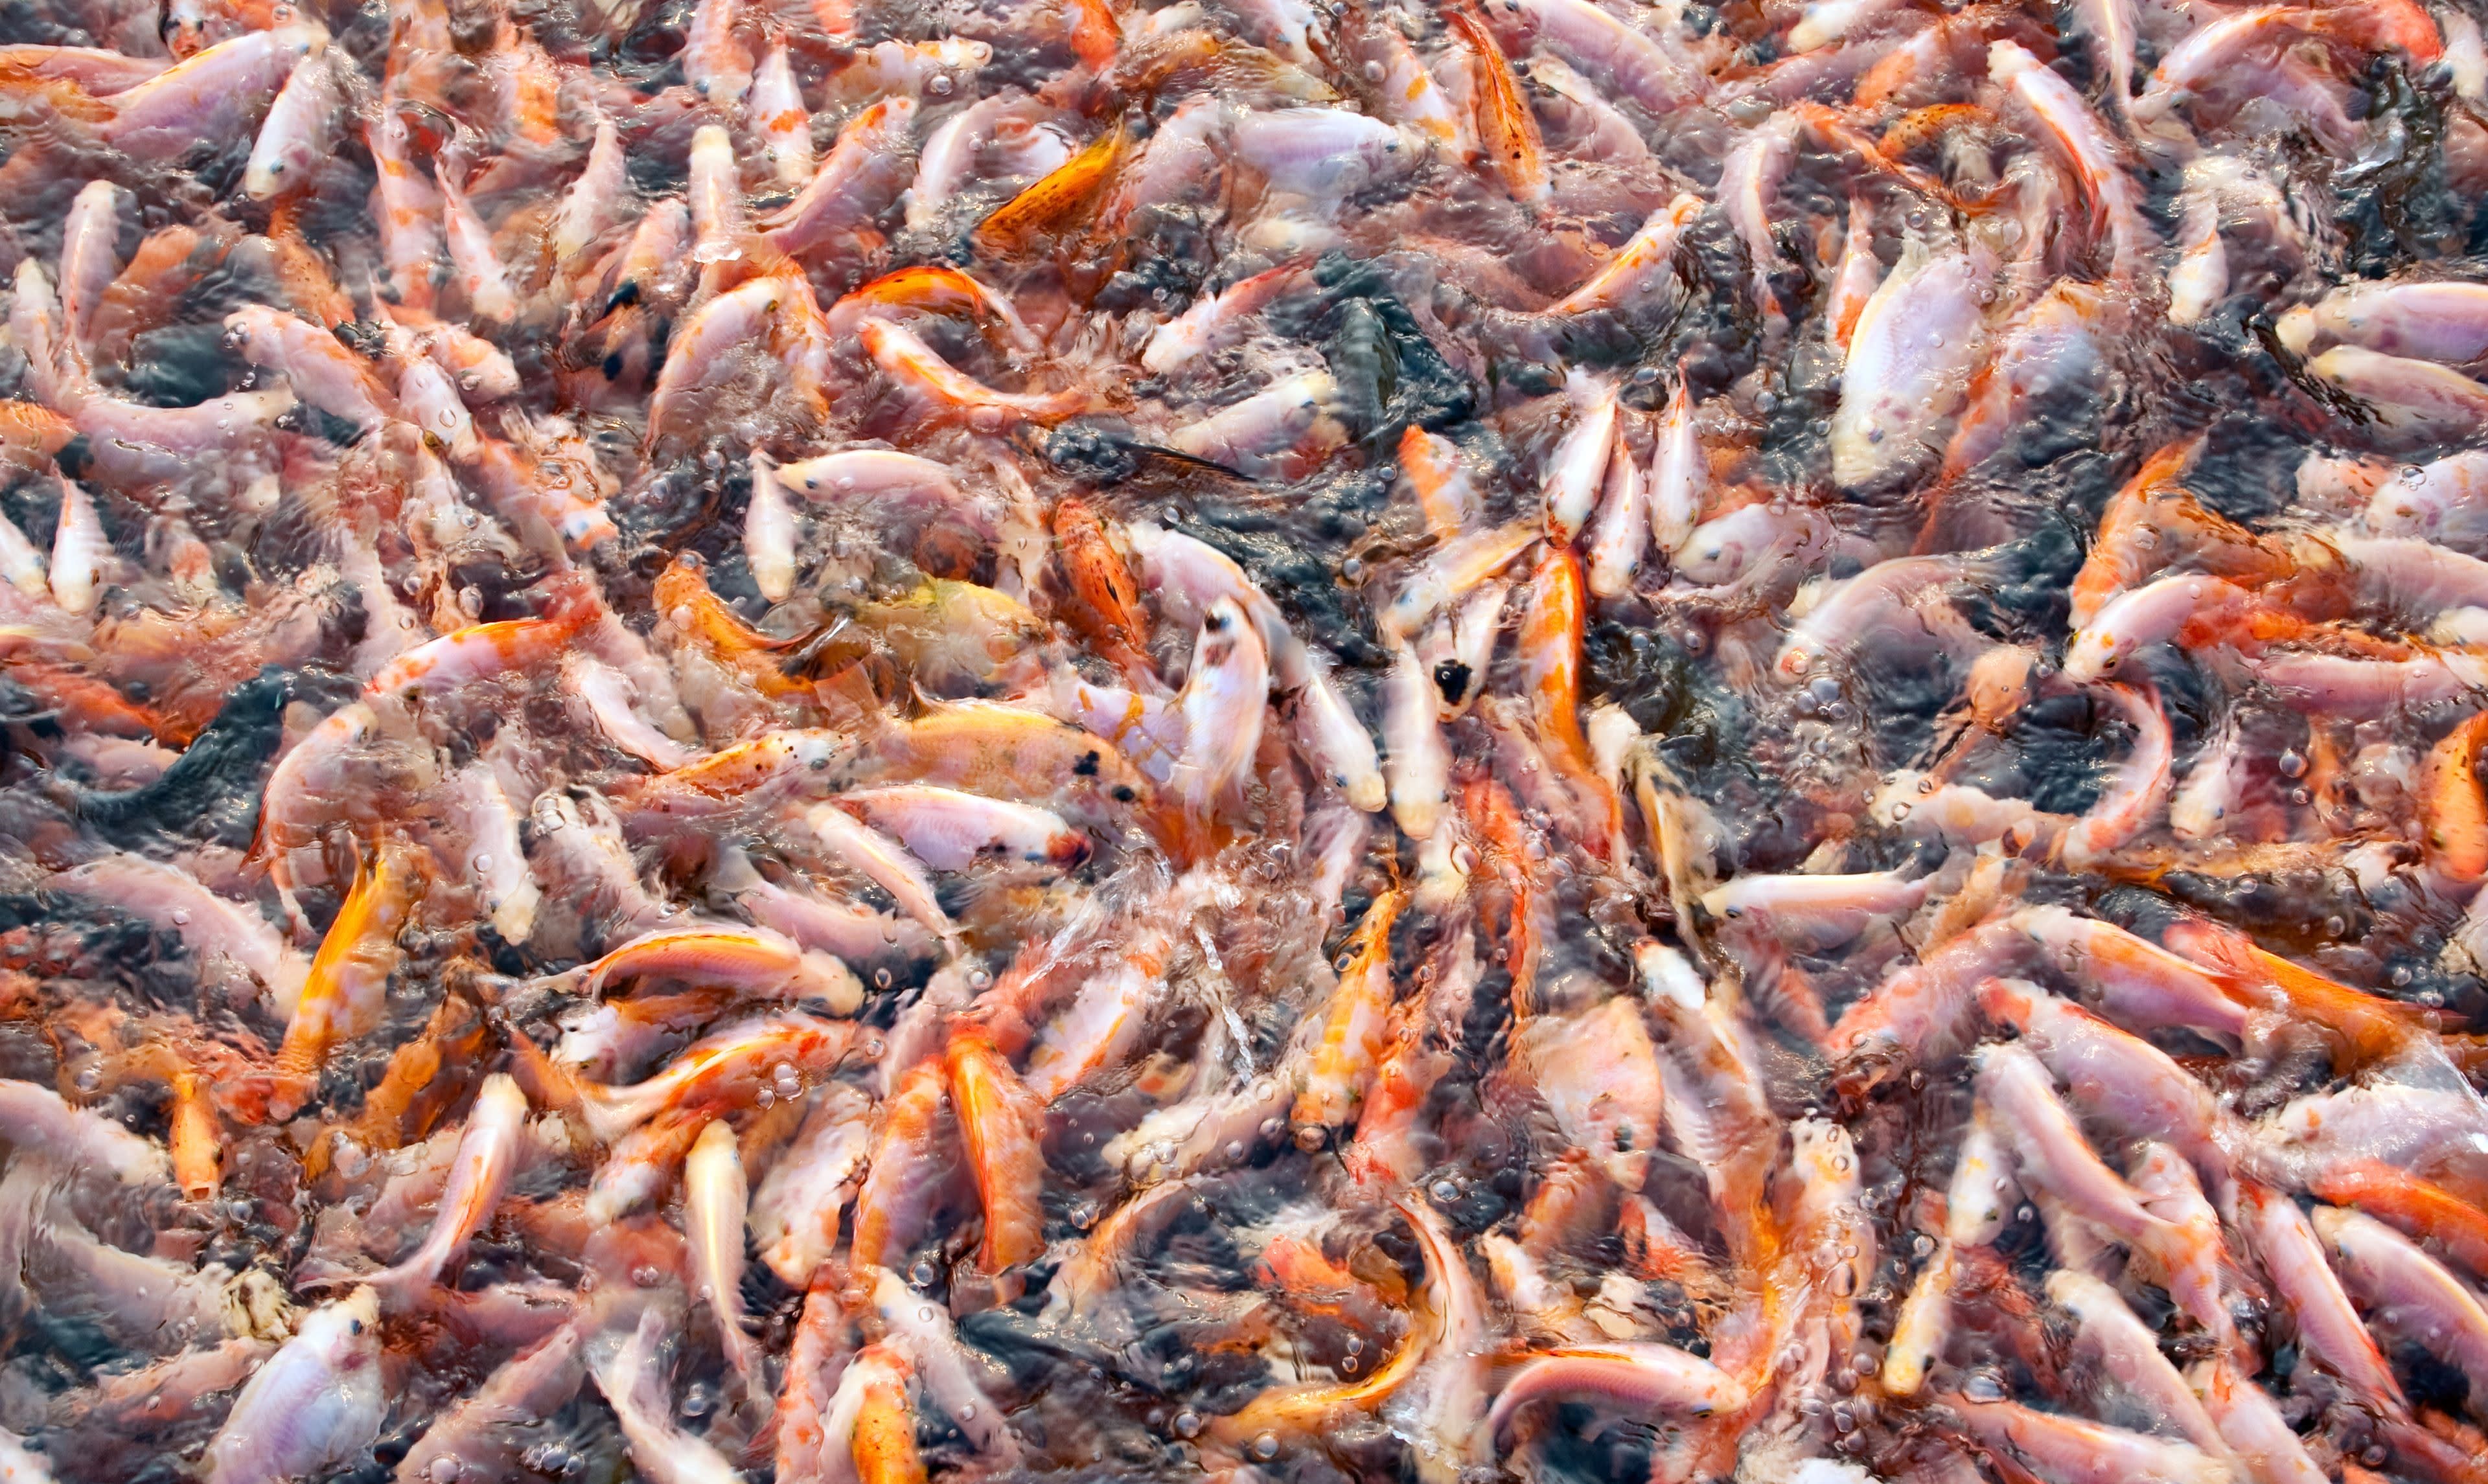 What Is the Fishing Industry and Why Is It Bad? Facts and Statistics